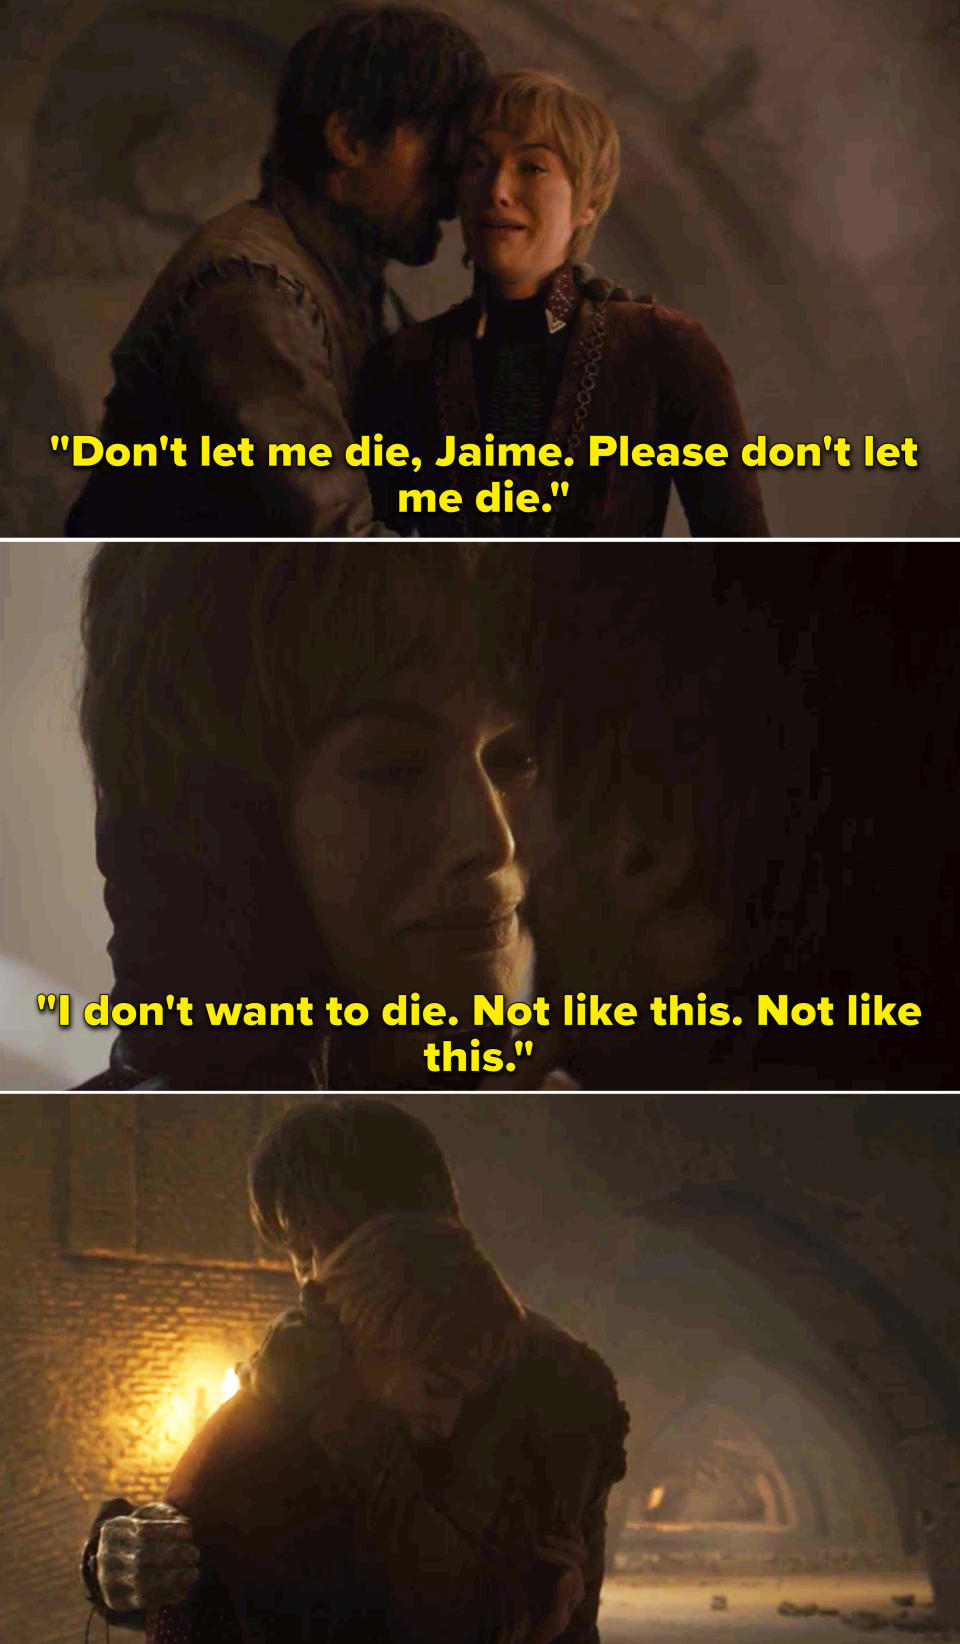 Cersei pleading with Jaime saying she doesn't want to die